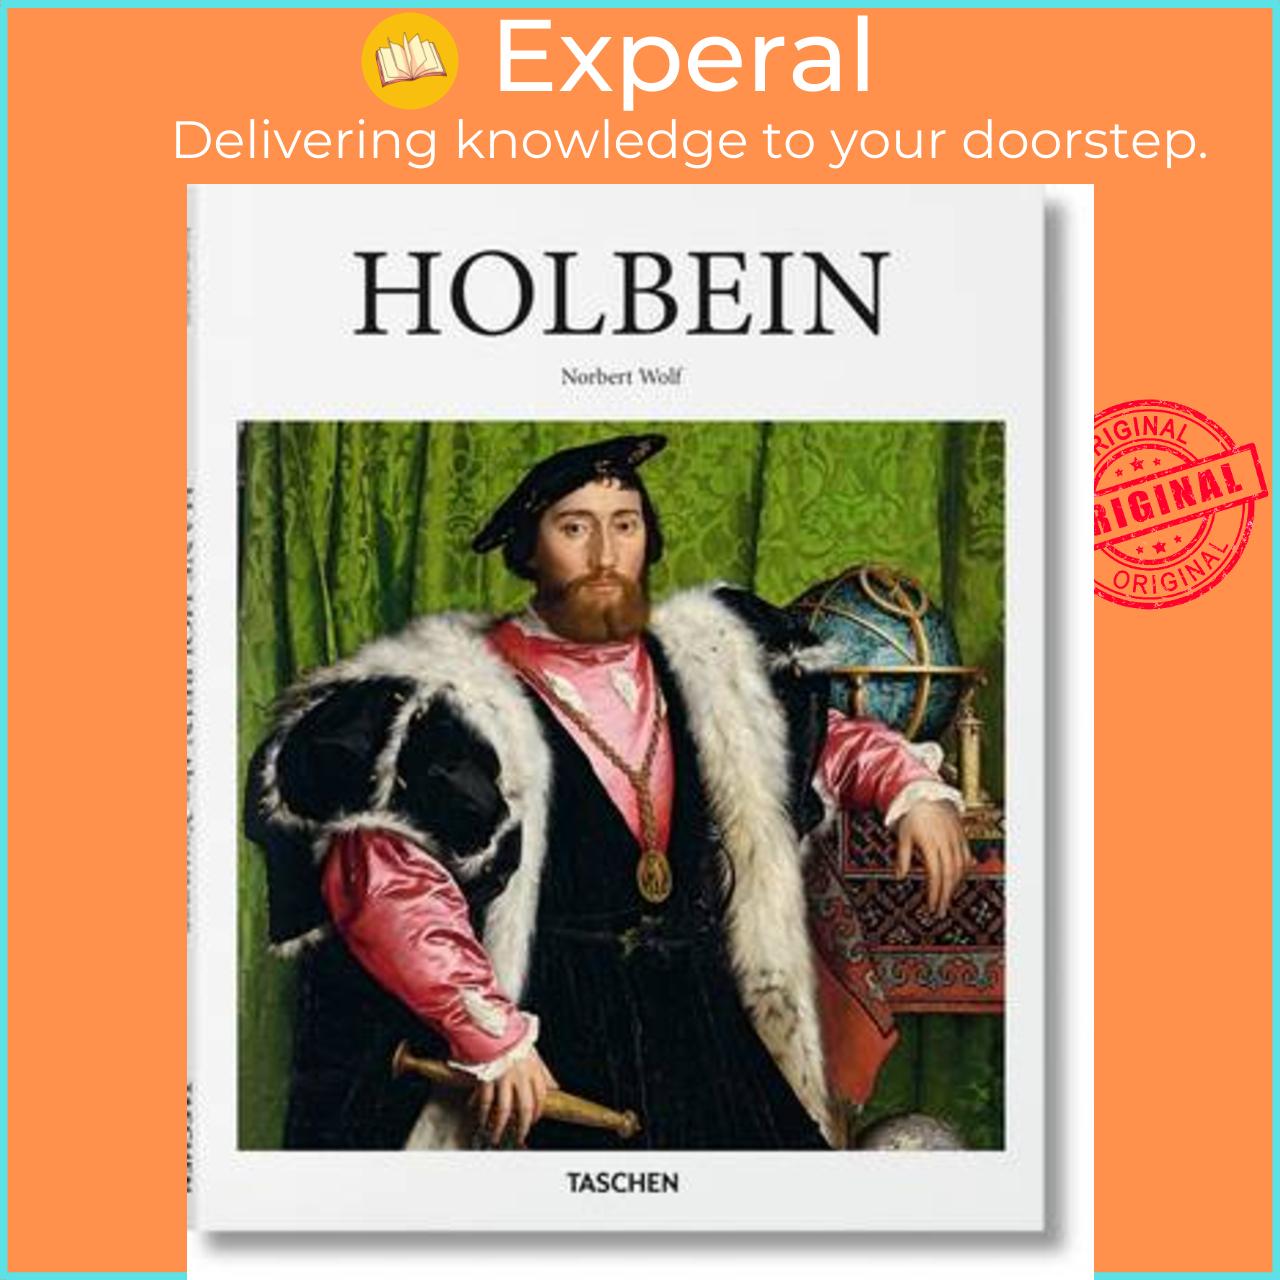 Sách - Holbein by Norbert Wolf (hardcover)